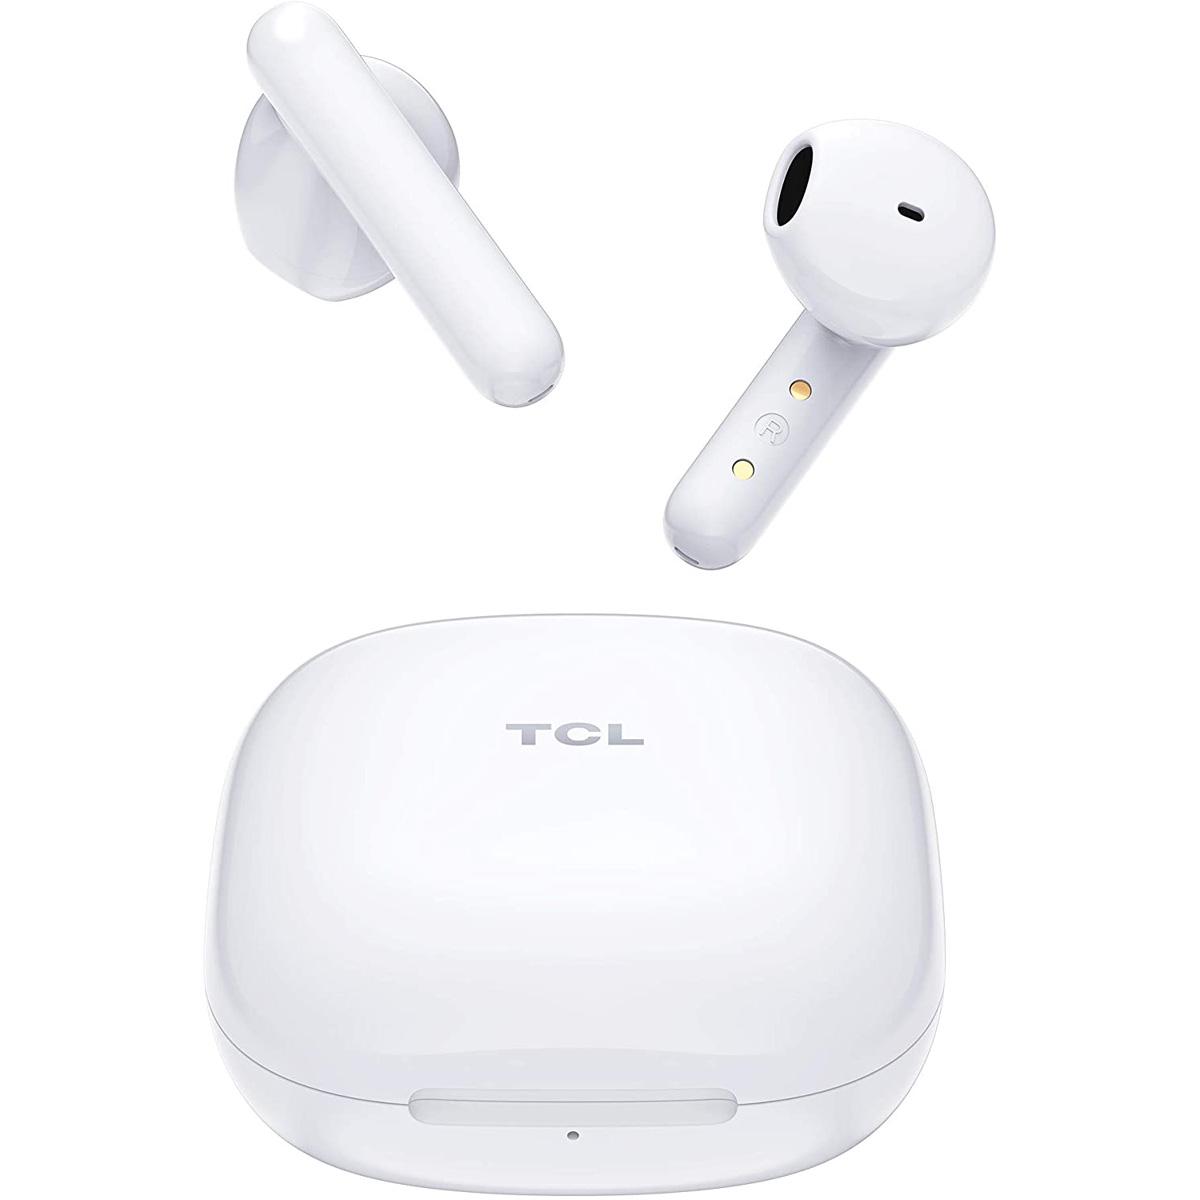 TCL S150 True Wireless Earbuds for $19.99 Shipped